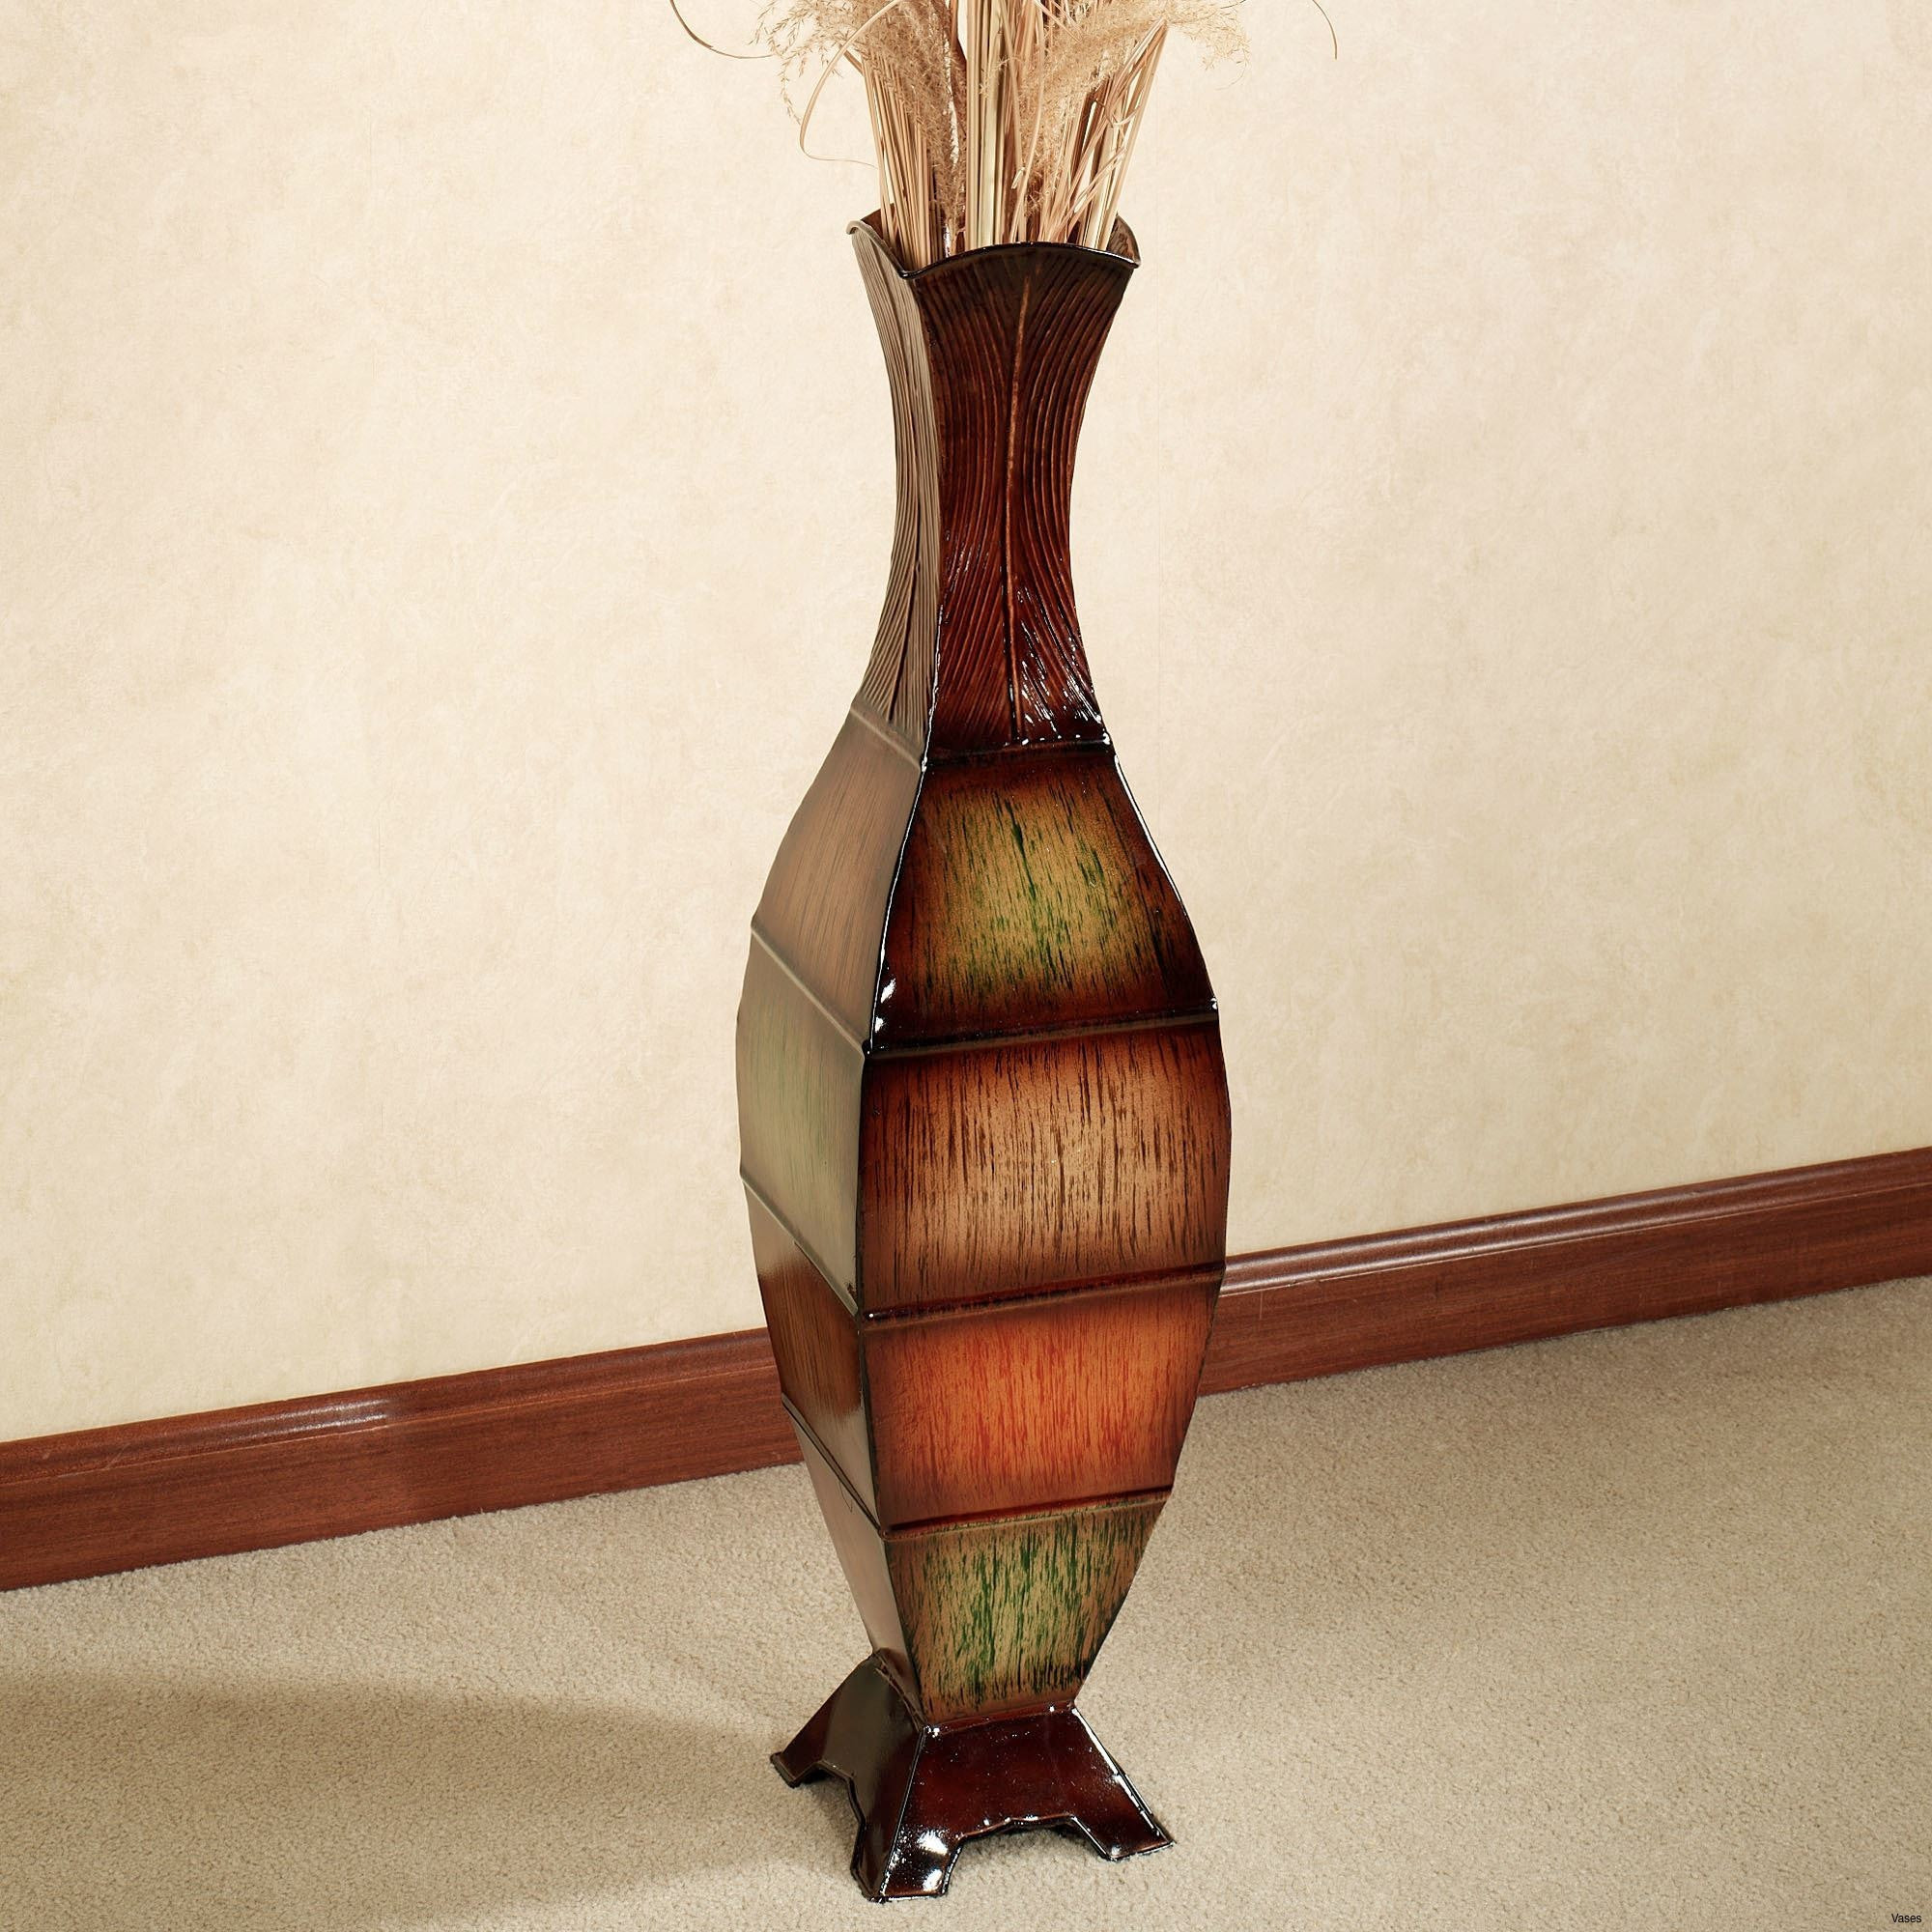 24 Wonderful White Teardrop Vase 2024 free download white teardrop vase of tall brown vase vase and used car restimages org intended for 24 luxury decorative tall floor vases accroalamode